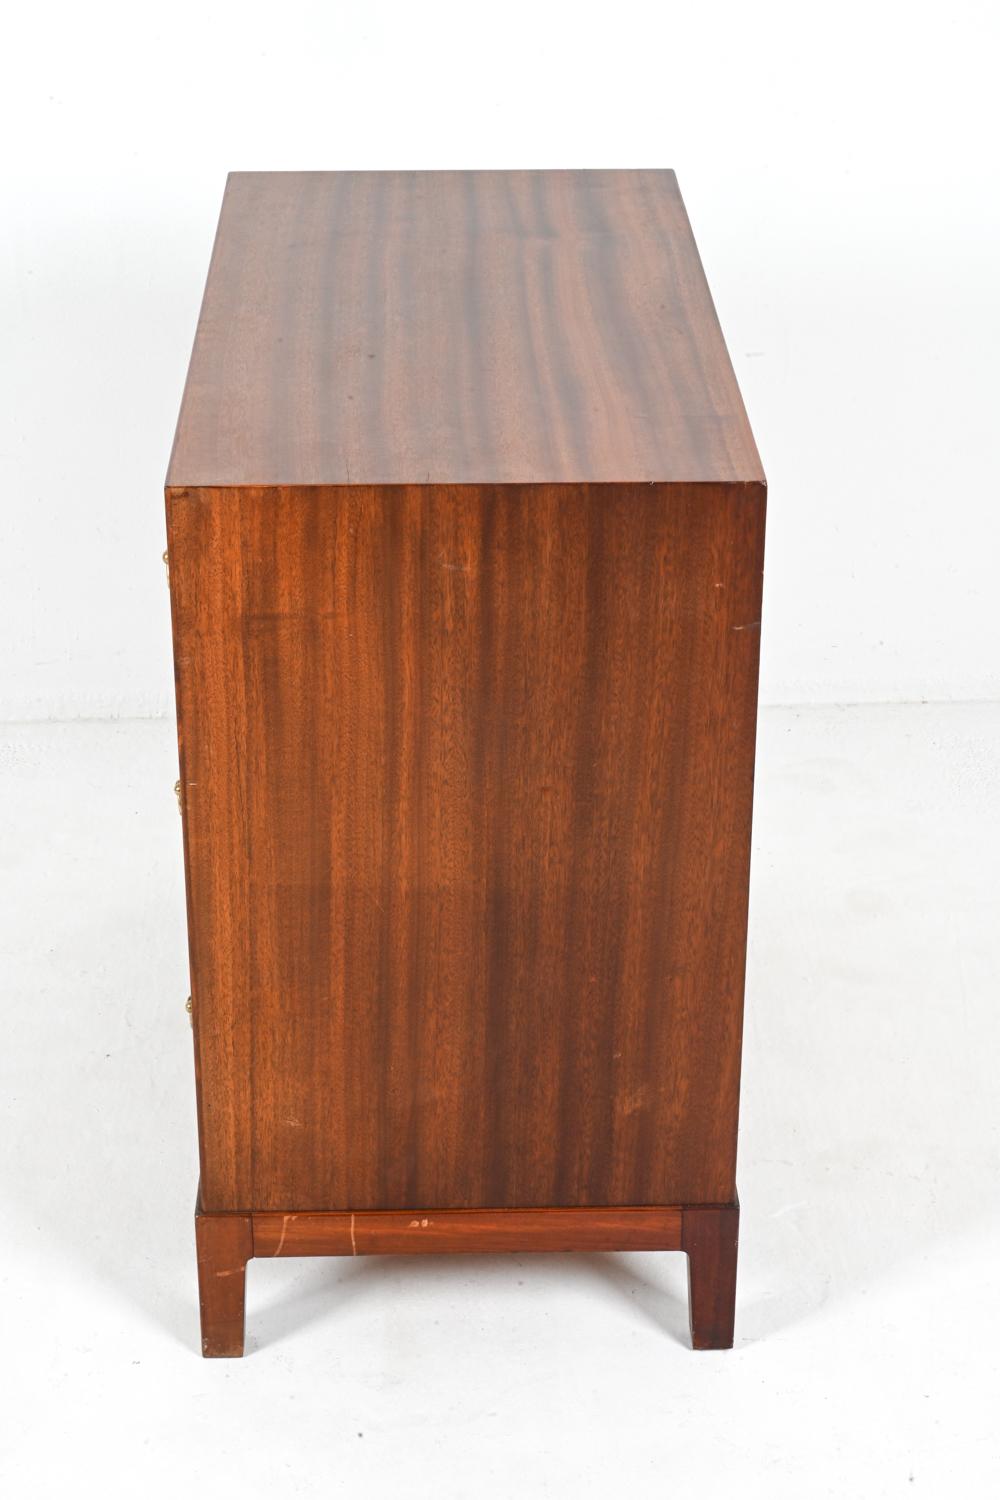 Rare Mahogany Three-Drawer Chest by Ole Wanscher for A. J. Iversen, c. 1940's For Sale 5